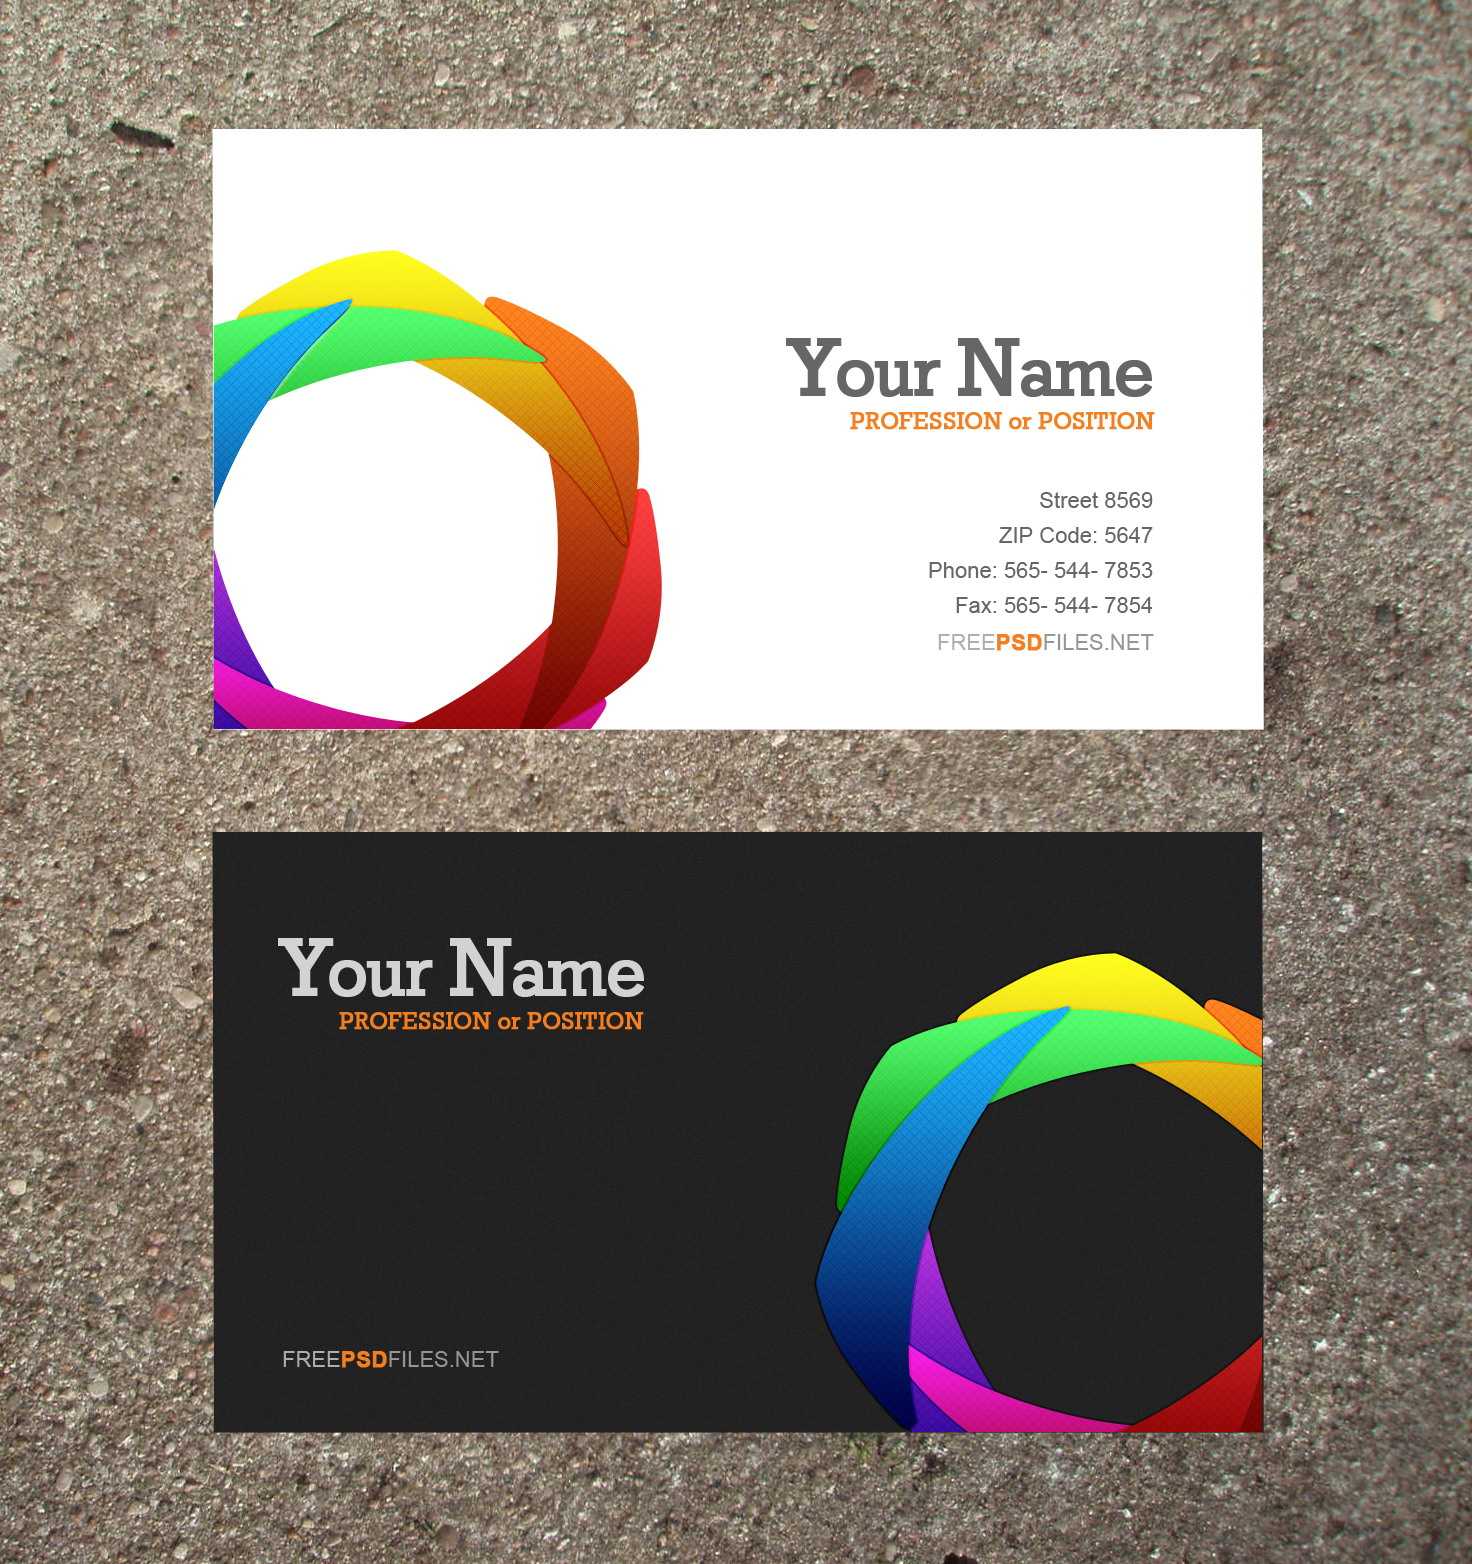 blank business card template download photoshop